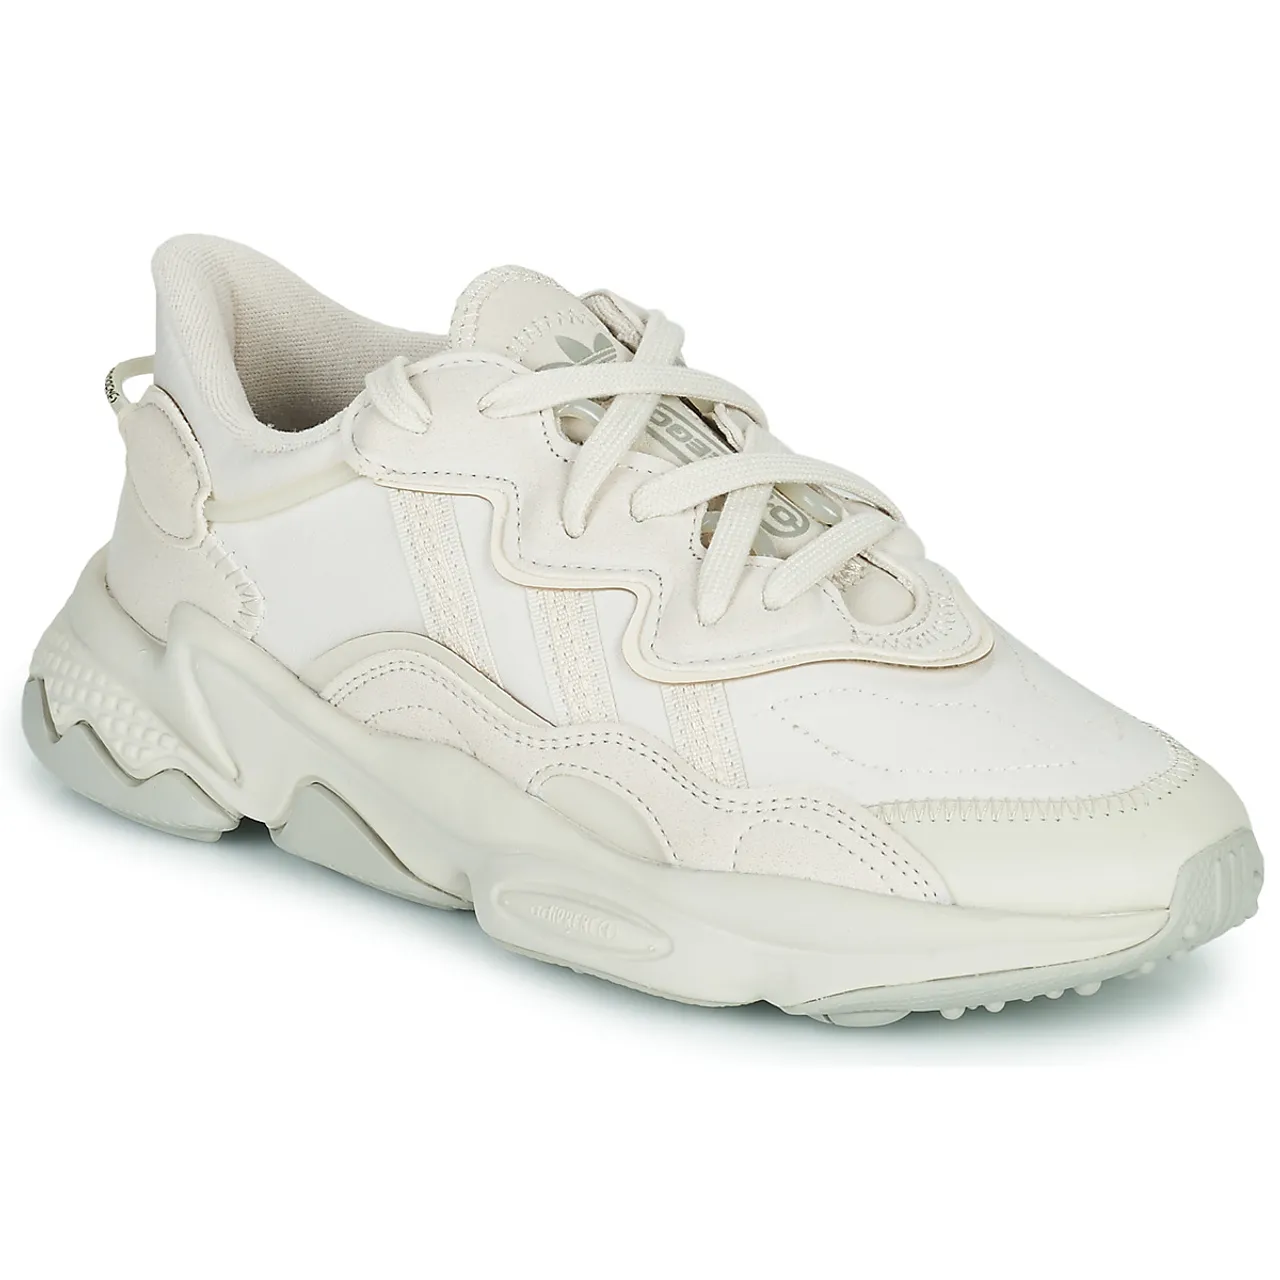 adidas  OZWEEGO J  boys's Children's Shoes (Trainers) in Beige